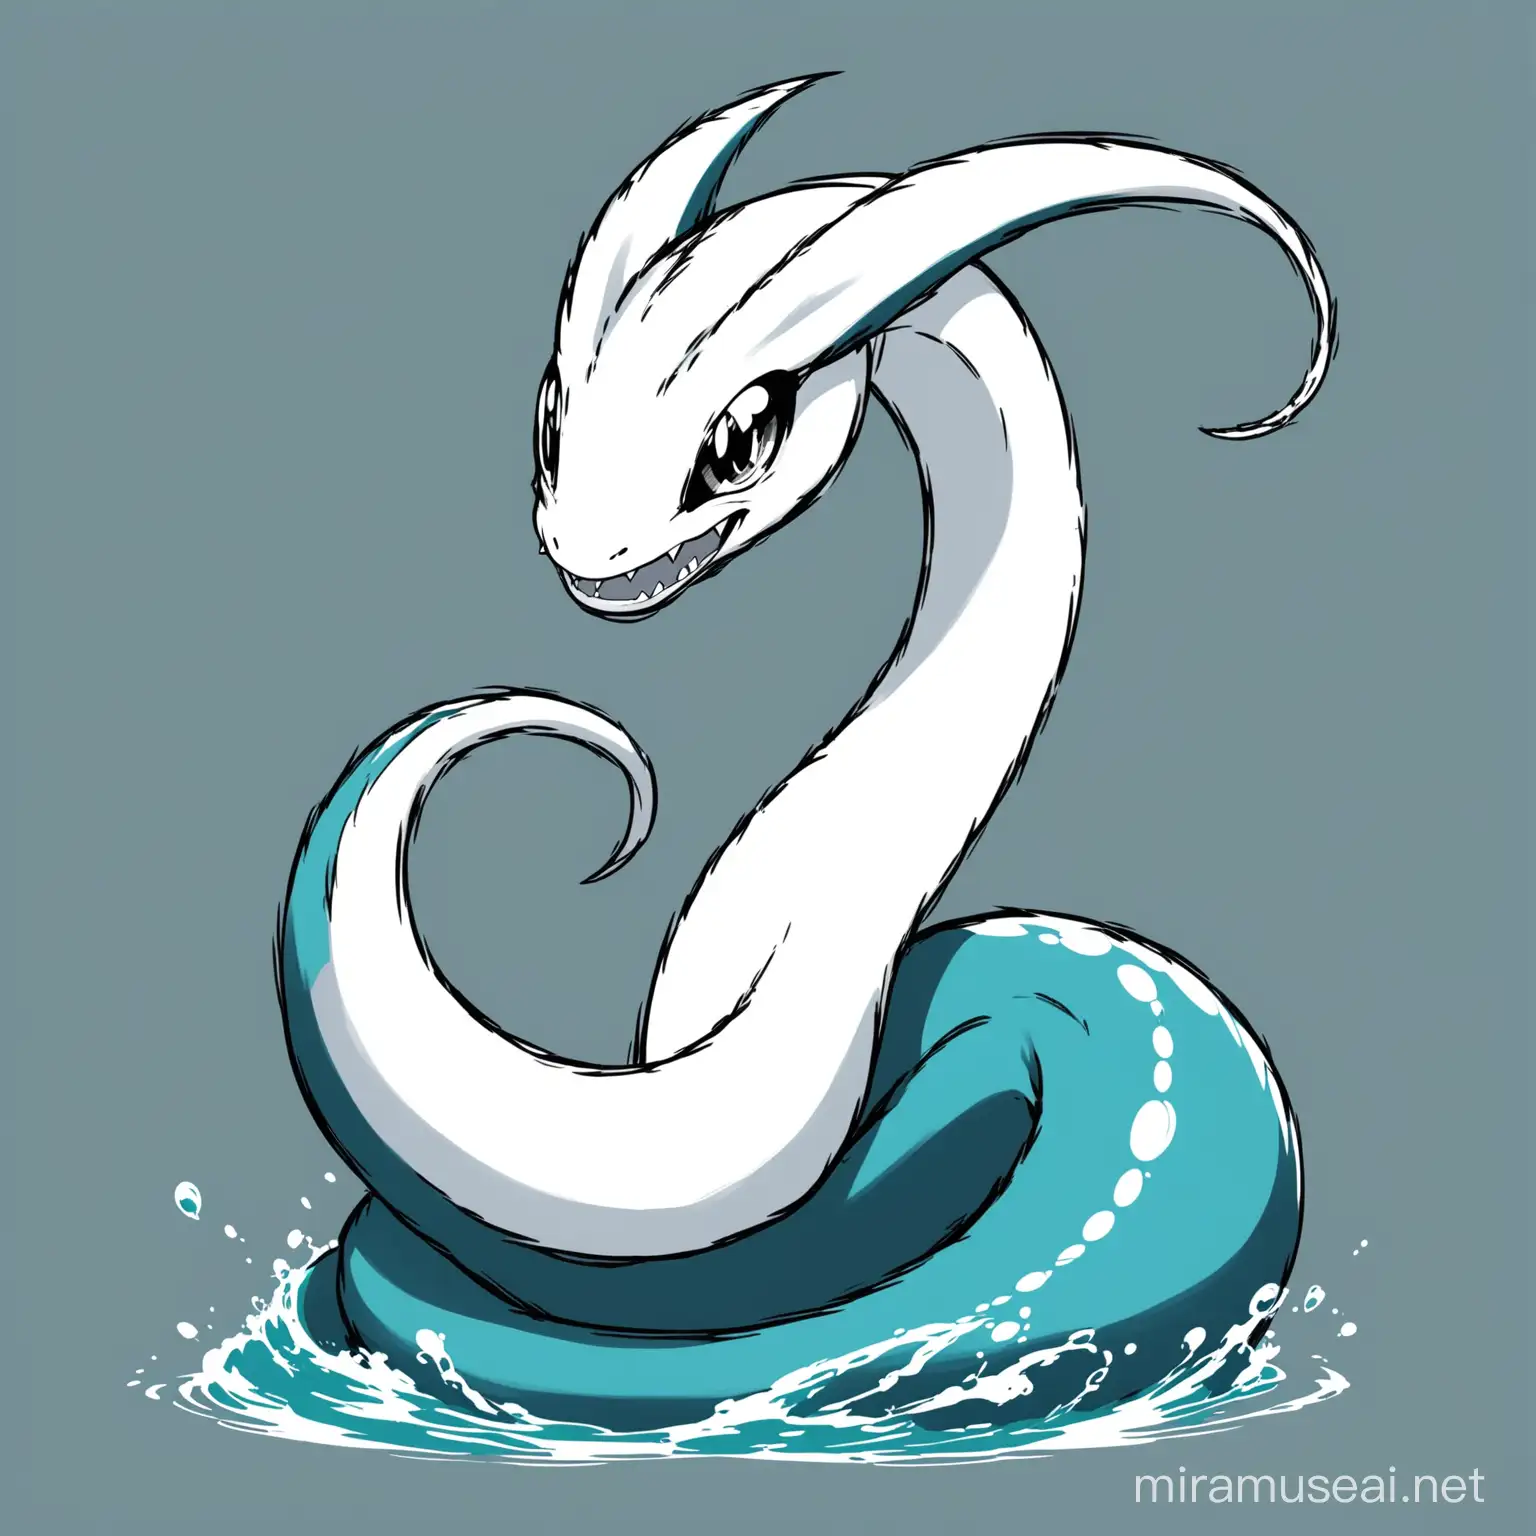 a water serpent that looks similar to the pokemon dratini but is menacing looking, has a long body, small eyes, black and white, no color, no background